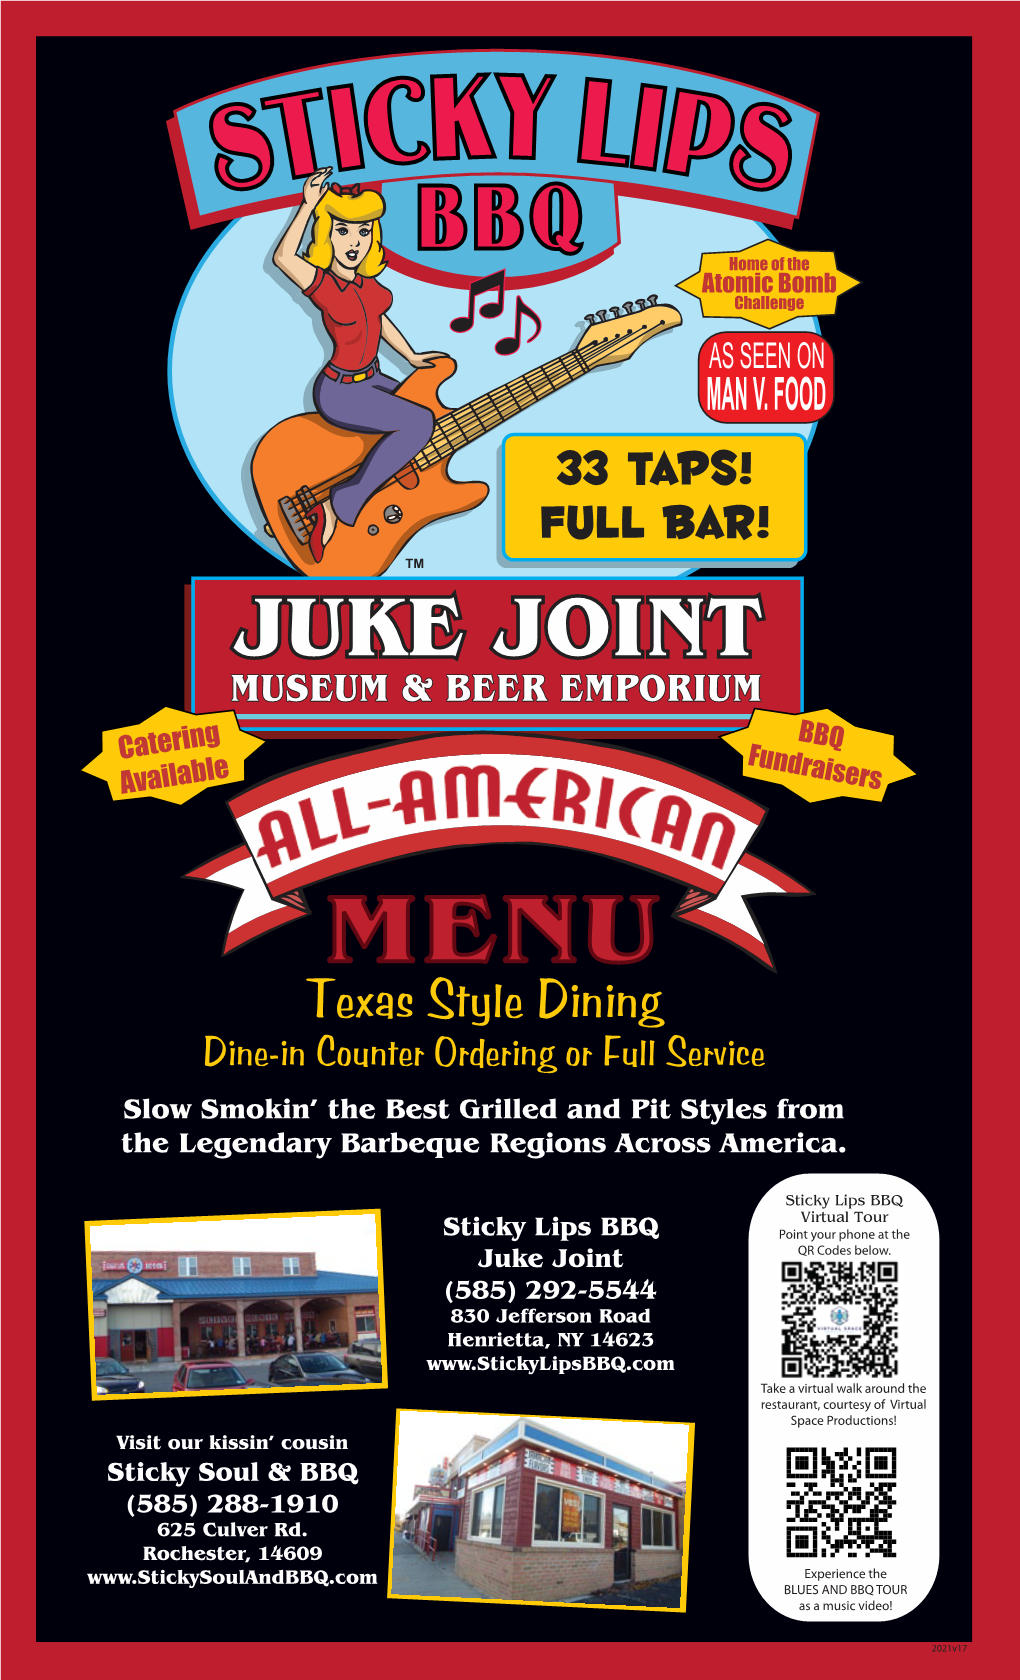 Sticky Lips BBQ Virtual Tour Sticky Lips BBQ Point Your Phone at the Juke Joint QR Codes Below